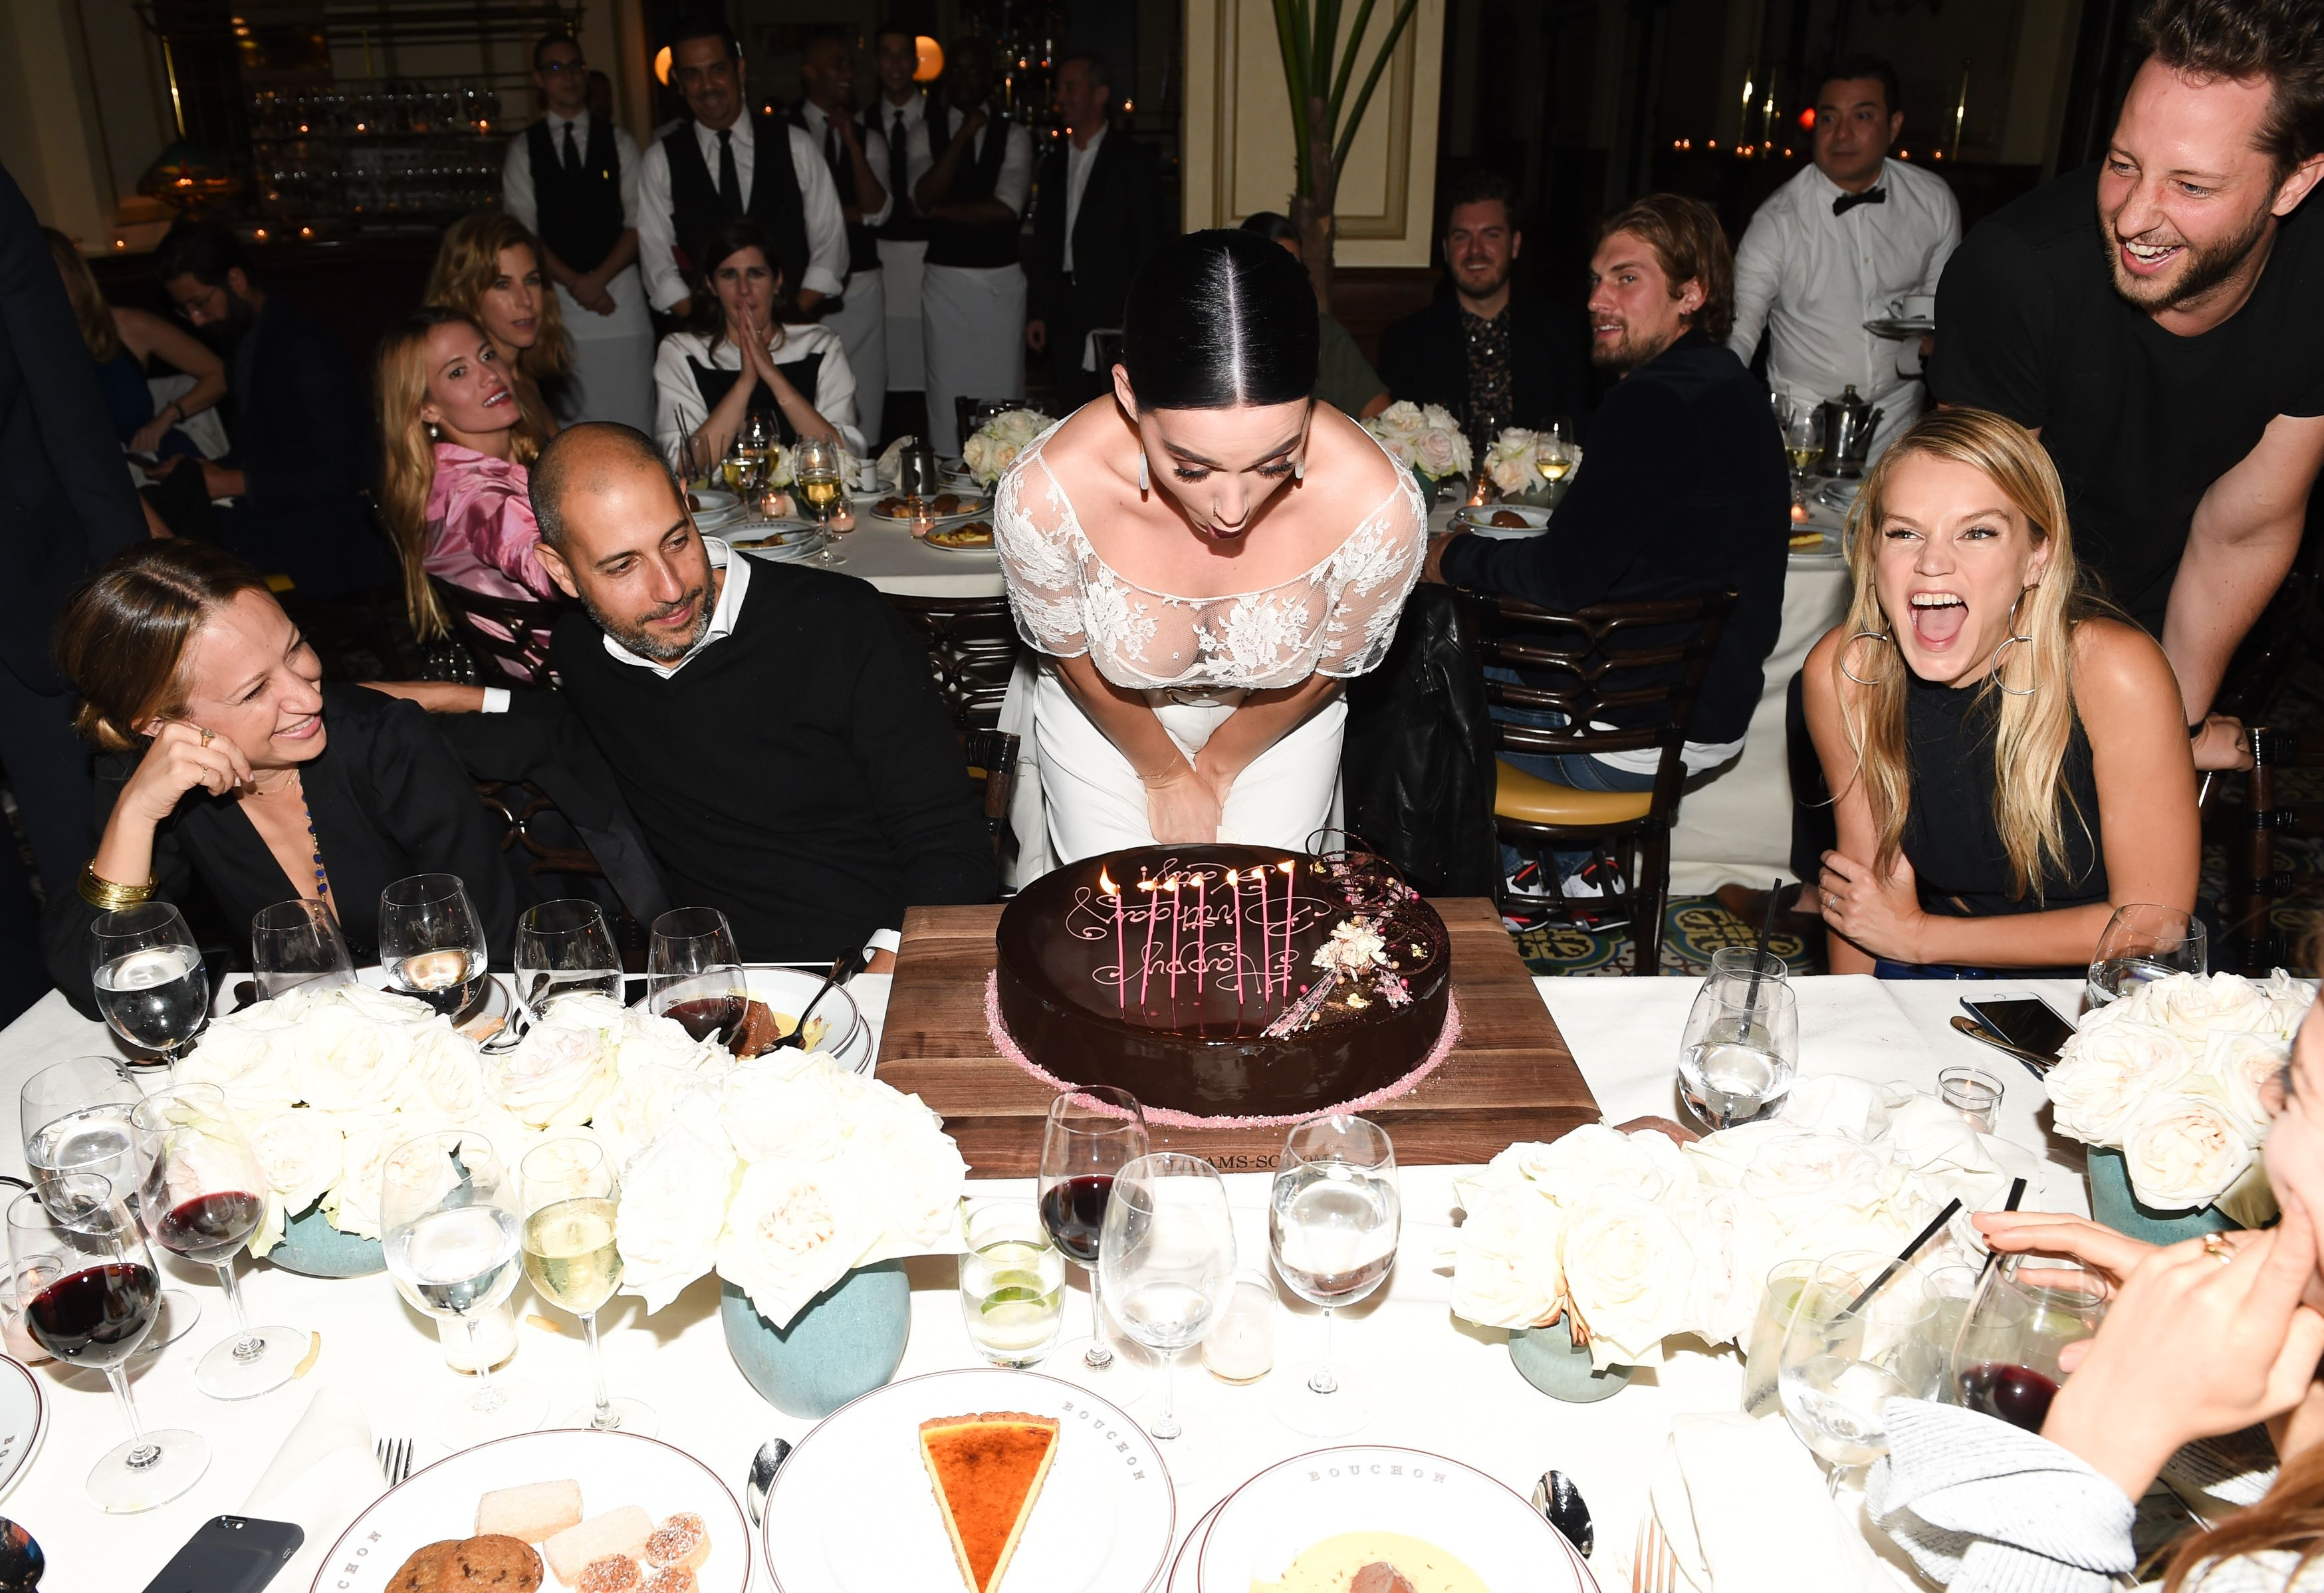 Katy Perry Blowing Out Candles On Her Birthday Cake